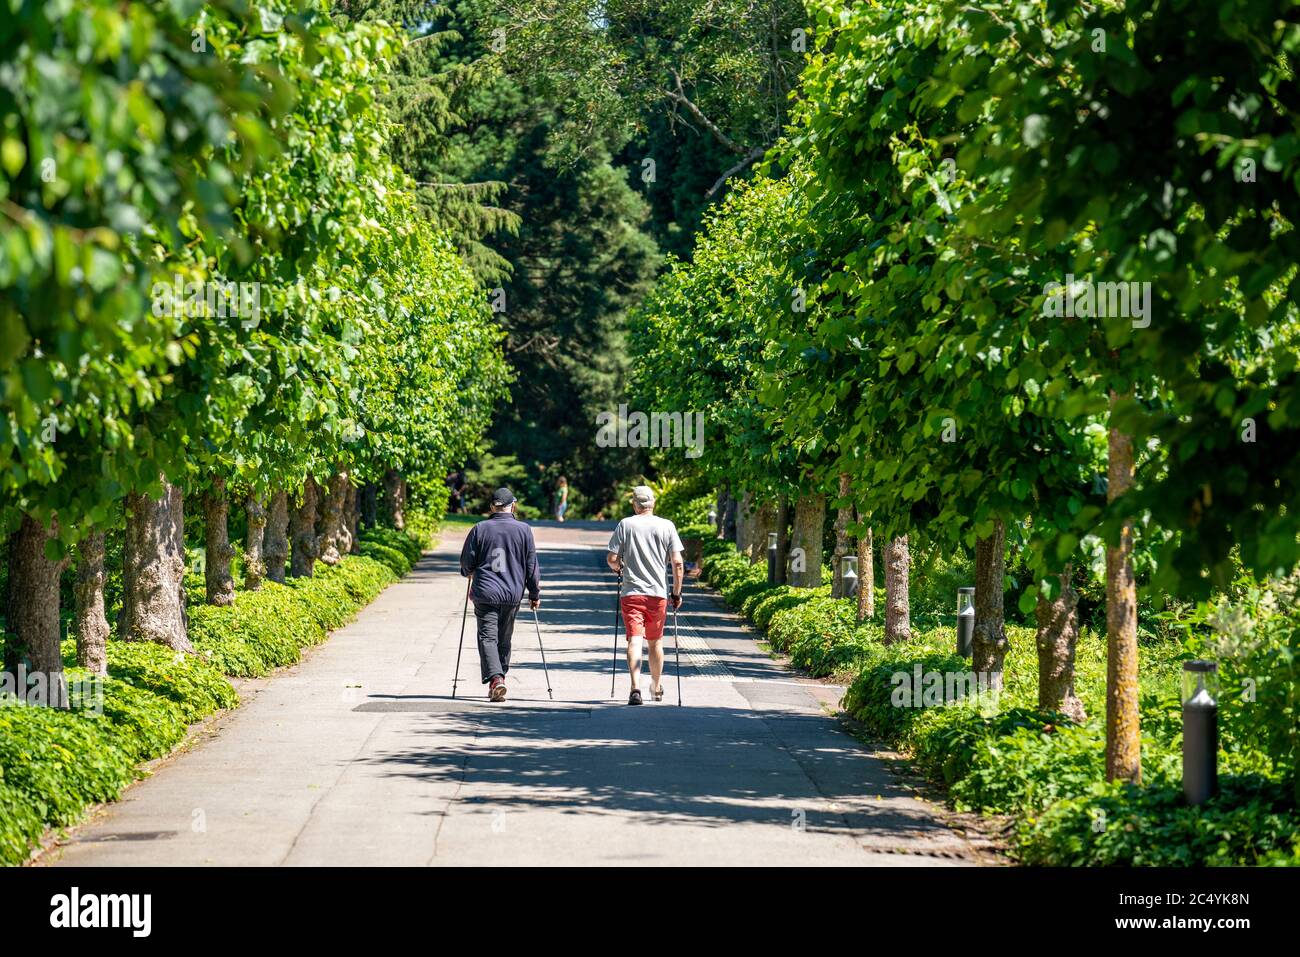 The Grugapark, Essen, botanical garden, park for leisure and local recreation, NRW, Germany Stock Photo